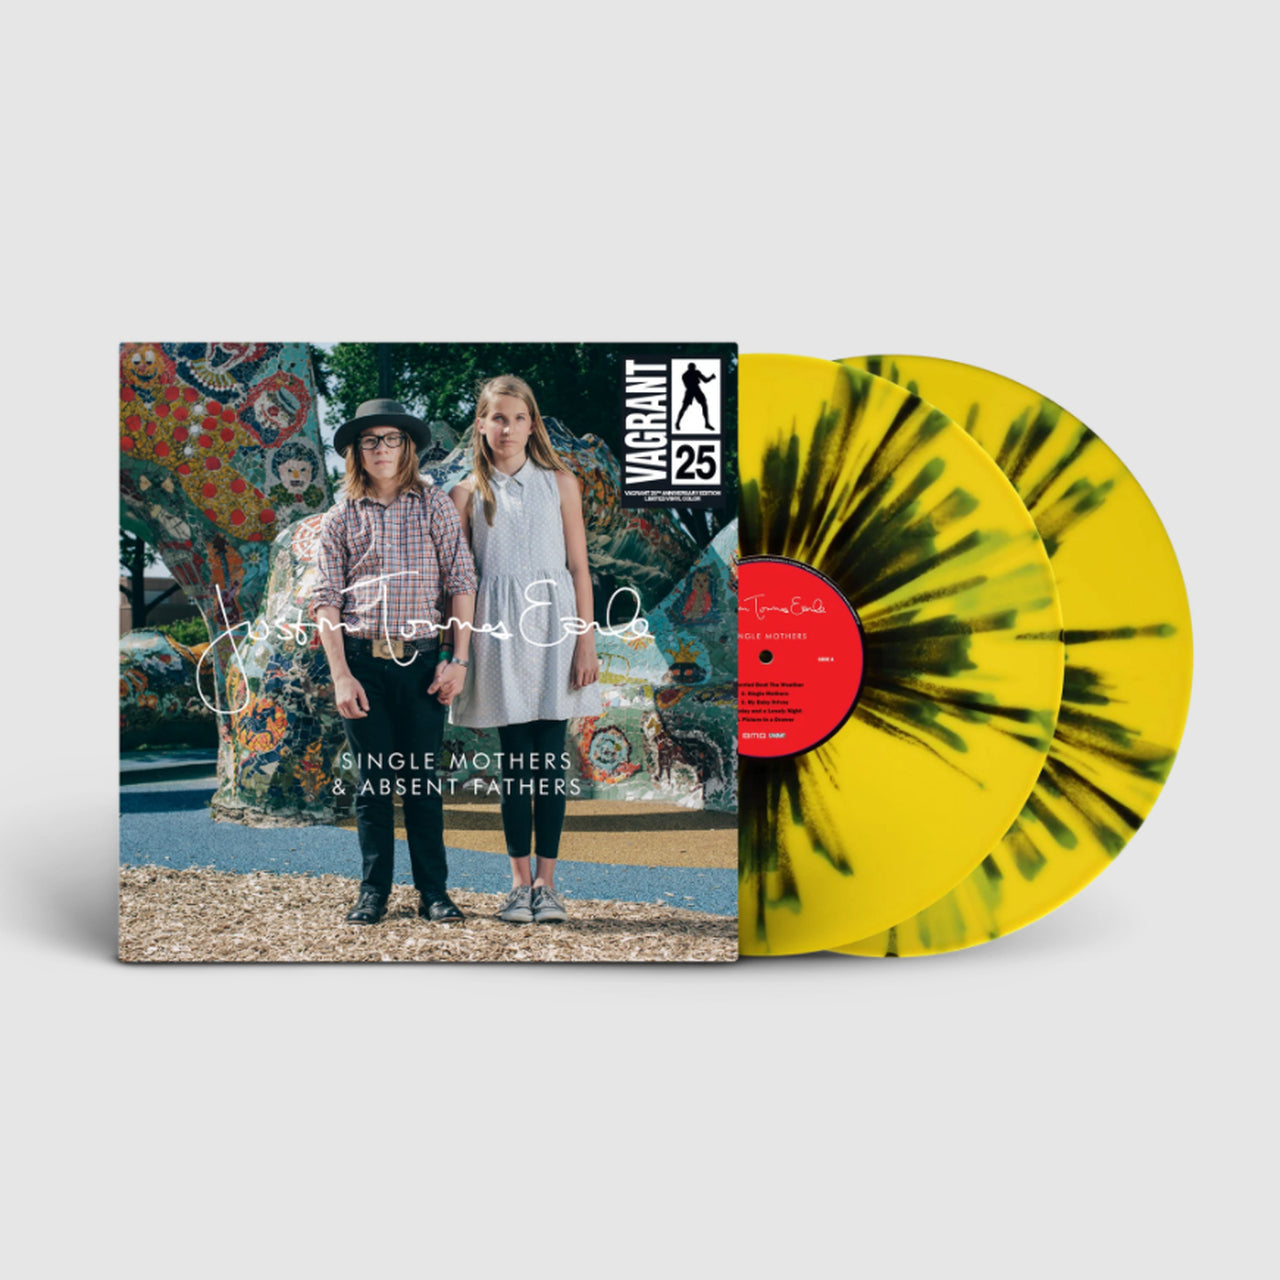 JUSTIN TOWNES EARLE 'SINGLE MOTHERS / ABSENT FATHERS' LIMITED EDITION' LP (Yellow w/Green & Black Splatter Vinyl)